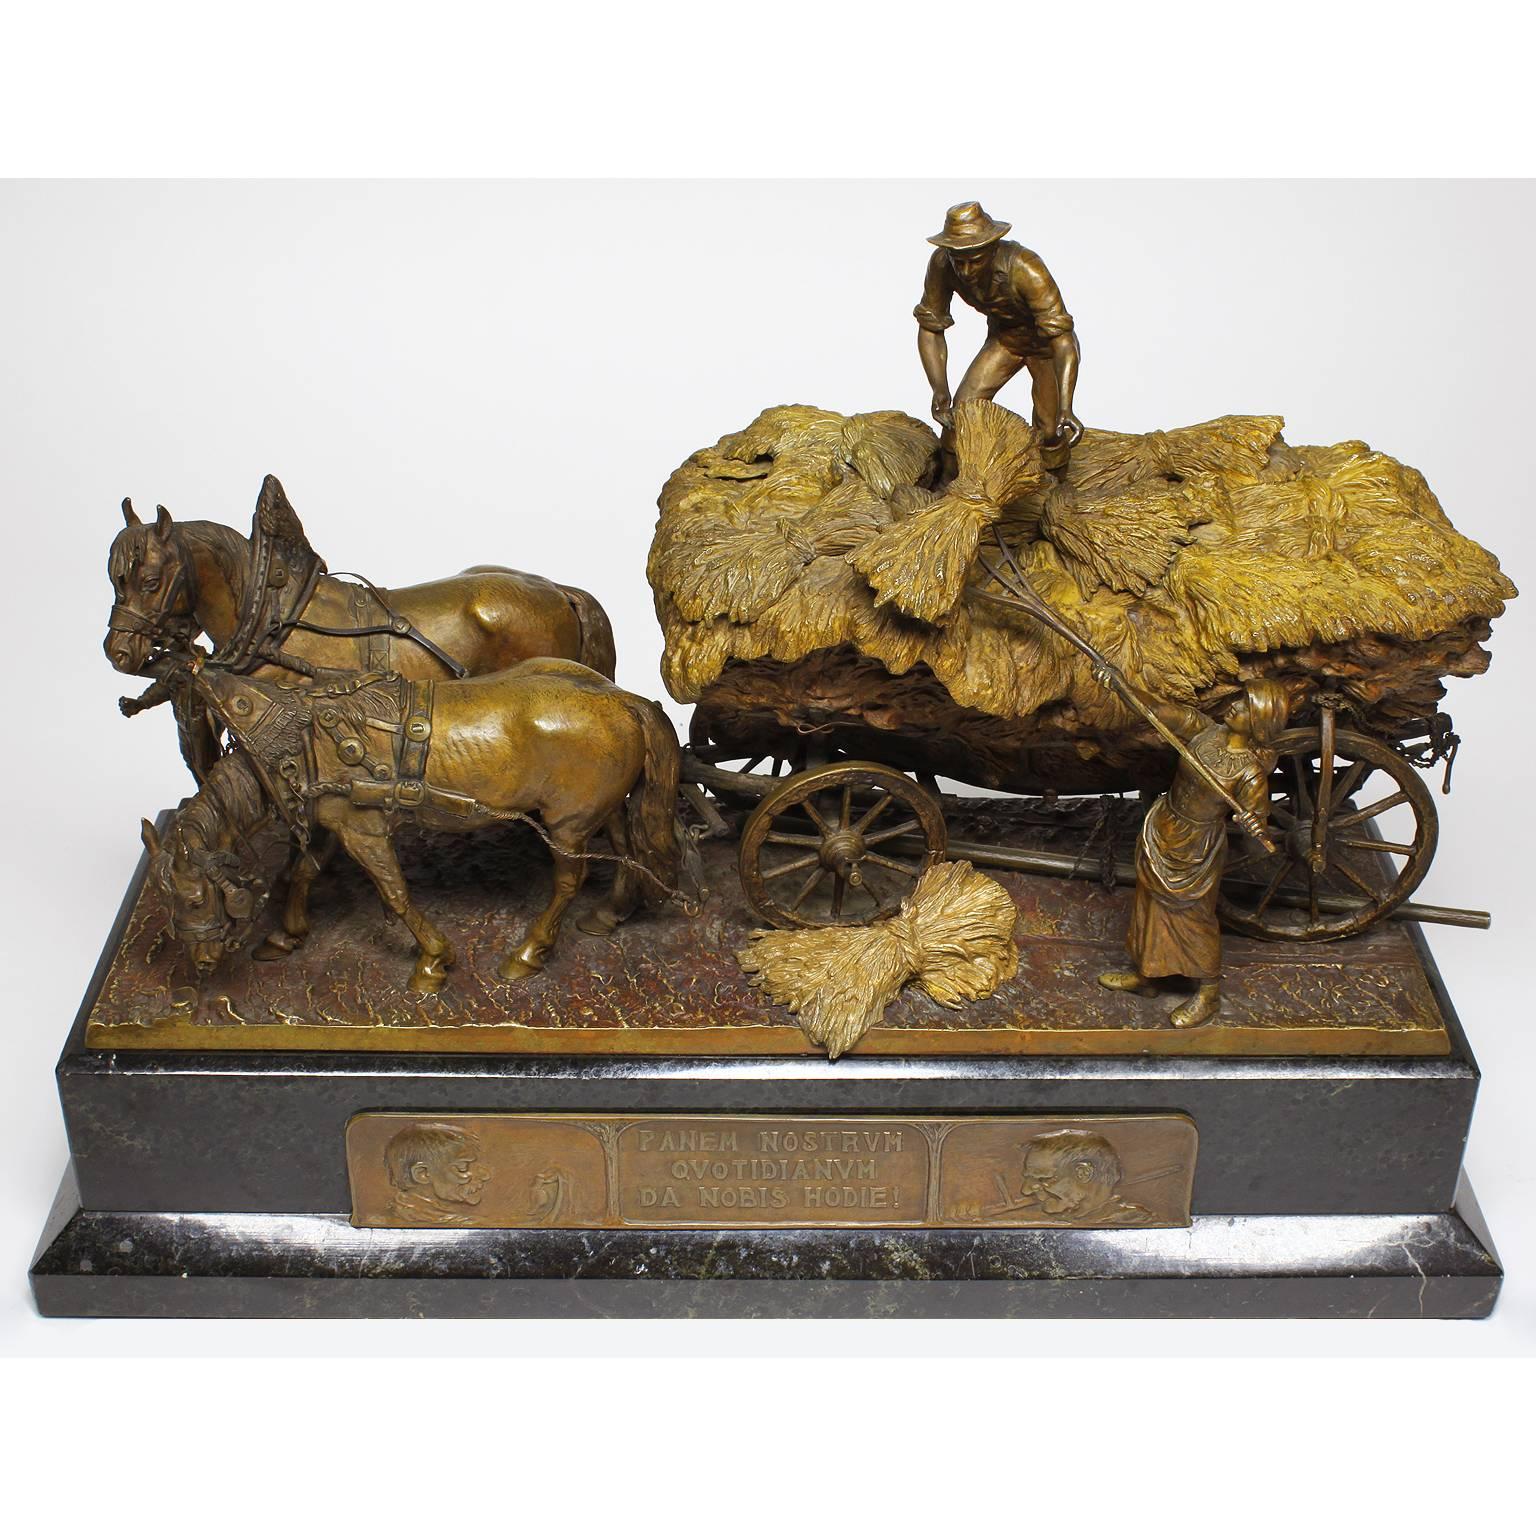 Rudolf Winder (Austrian, b. 1842) A very fine Austrian 19th century gilt bronze figural group depicting farmers loading a horse-drawn-cart with their wheat harvest. The Superb quality sculpture with fine attention to detail and chasing with the male